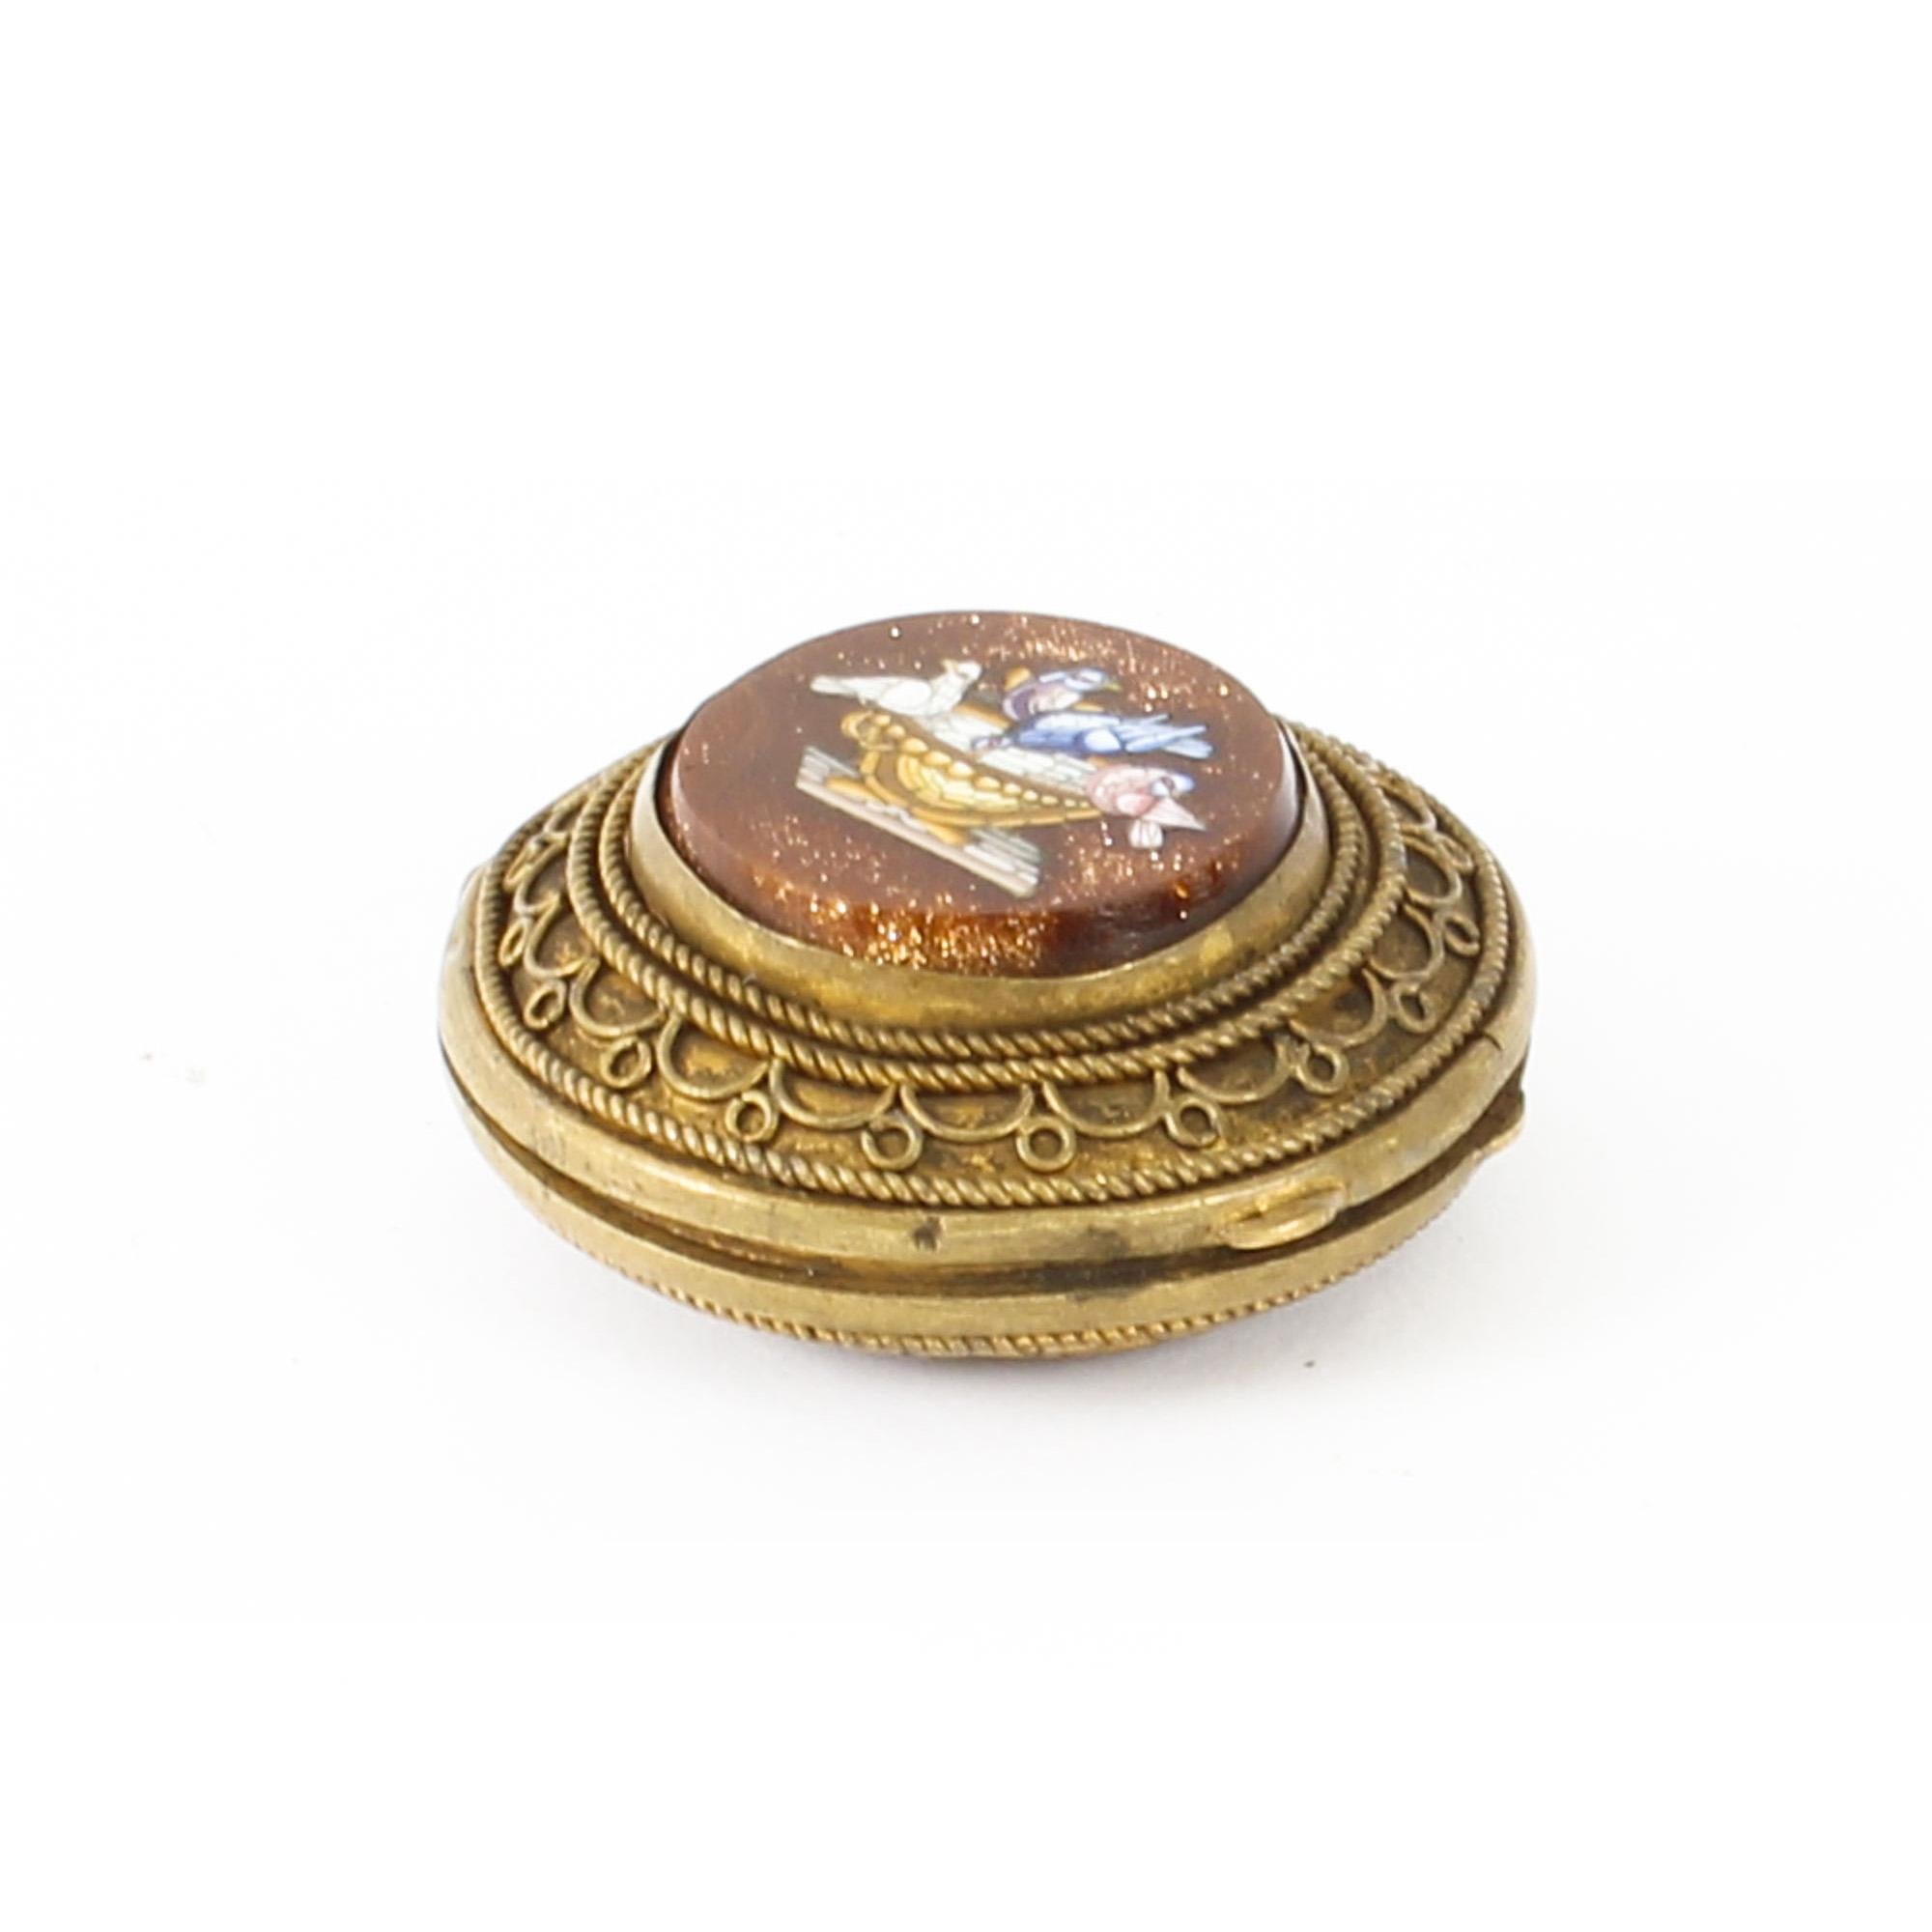 This is an exquisite antique Italianate ormolu pill box with two micromosaic plaques, dating from the late 19th century.

The box is hinged and round in shape. The top of the box is decorated with a charming centred and raised micromosaic of